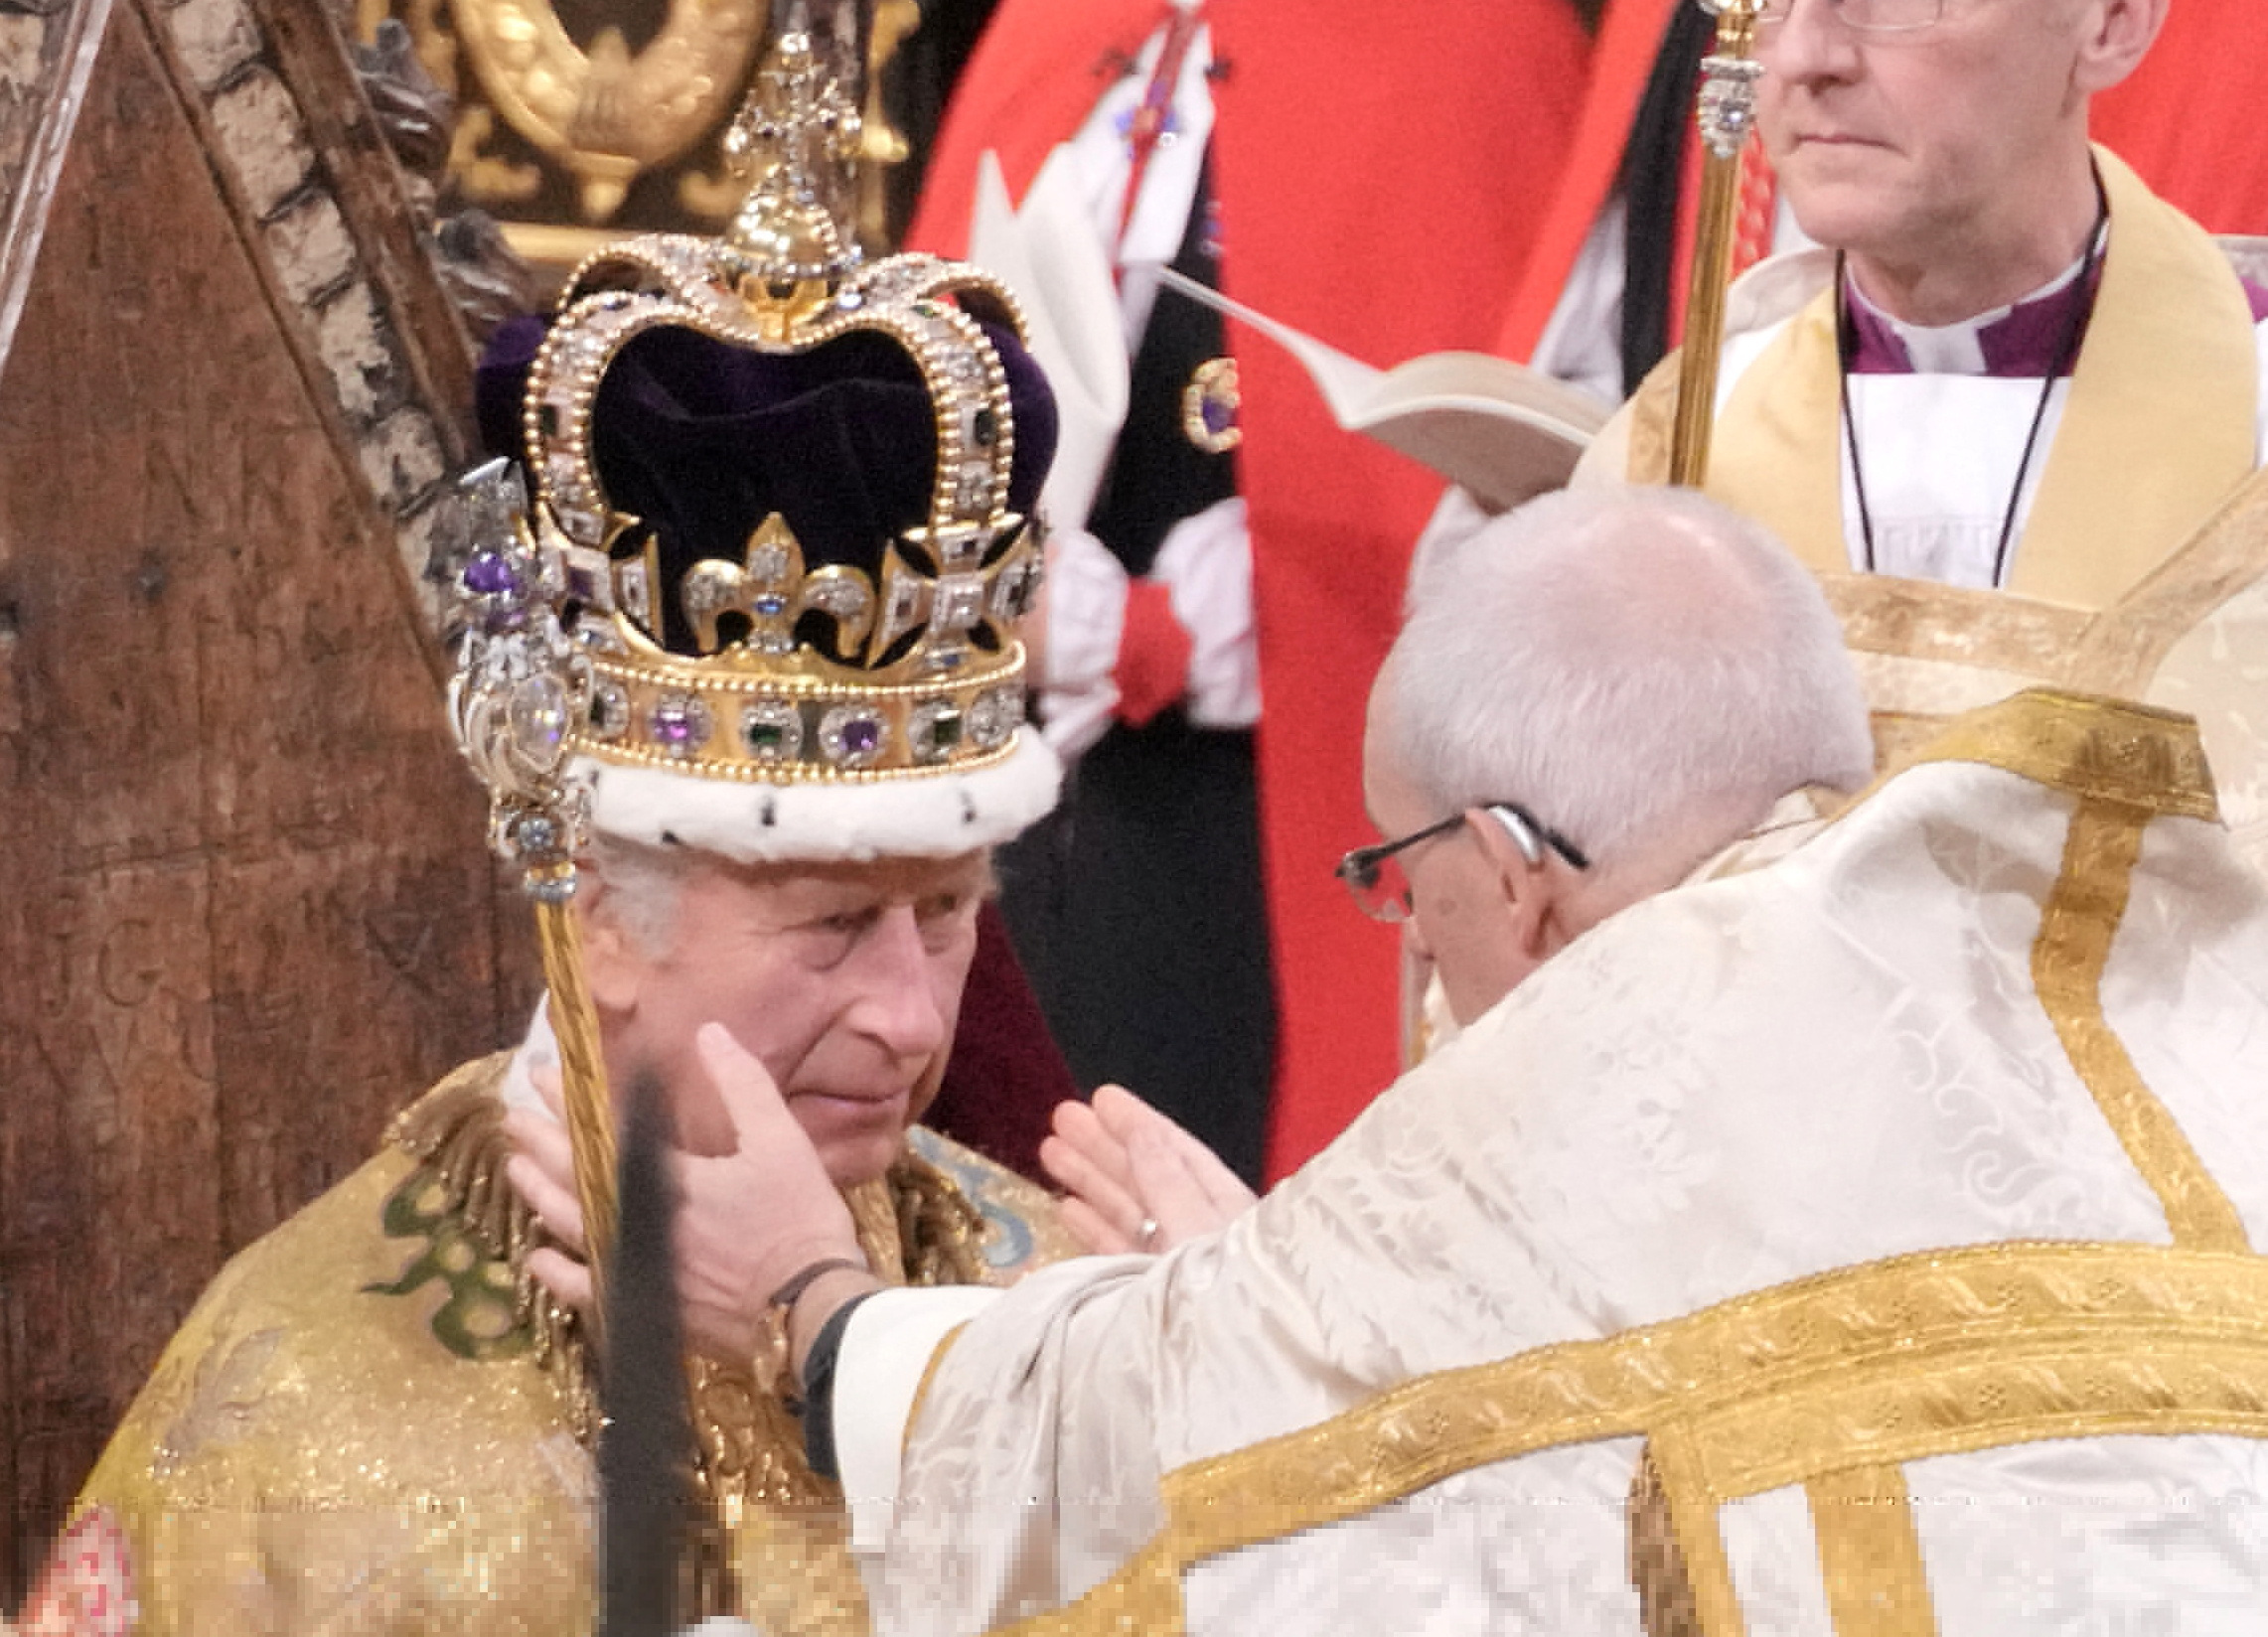 King Charles III crowned as the UK blends tradition and change